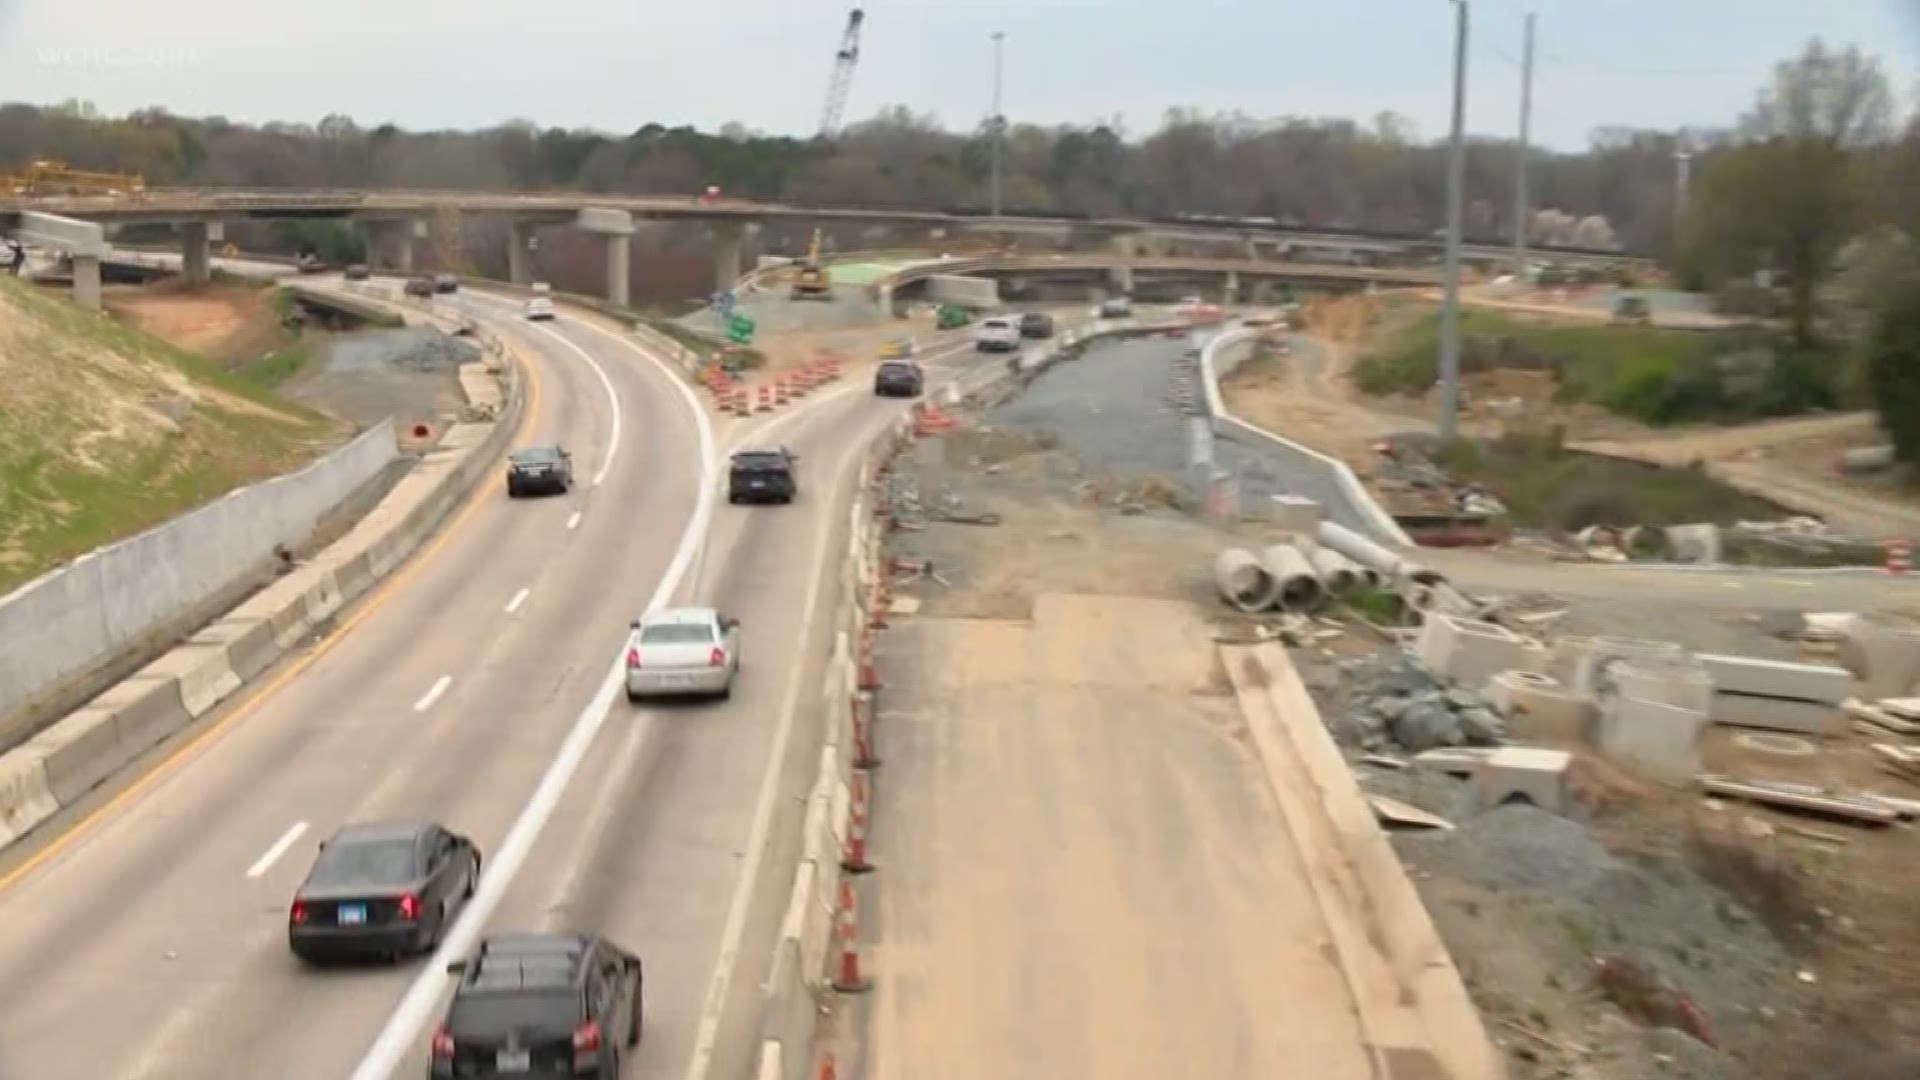 People who live along the I-77 corridor have opposed this project from the very beginning -- saying it'll hurt them financially when the toll road opens later this year.